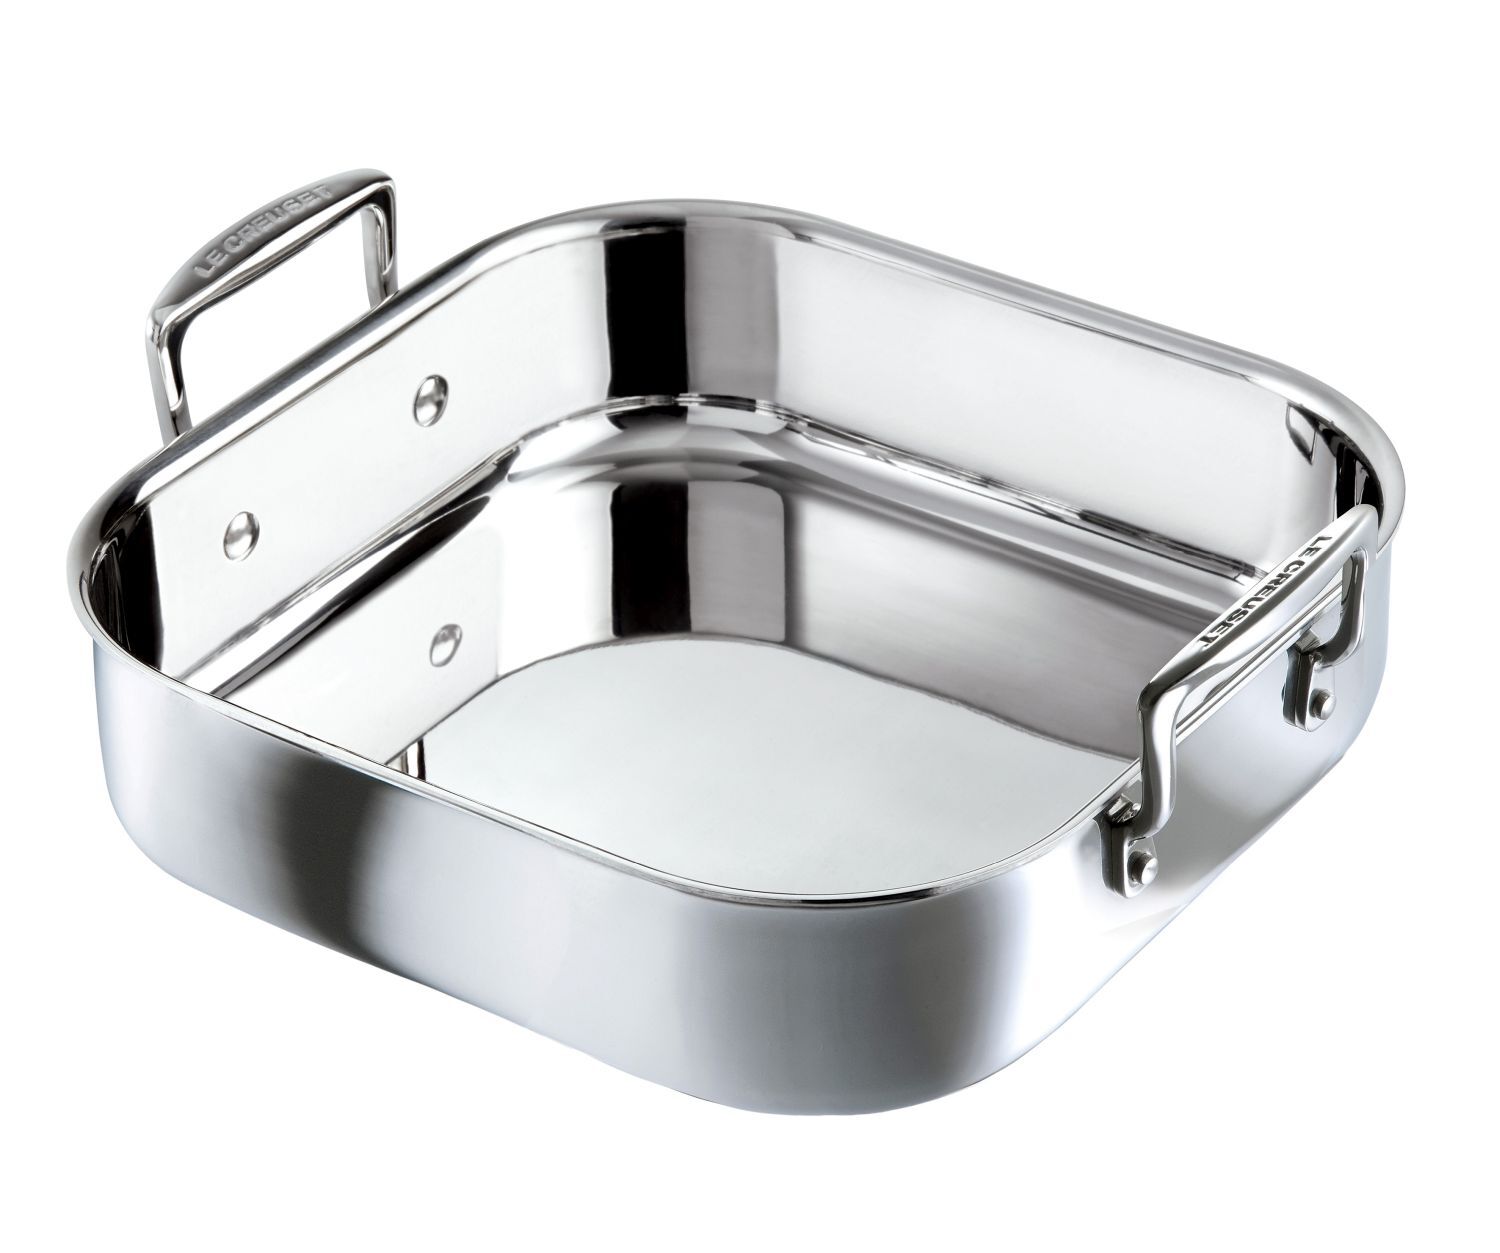 Le Creuset Classic Stainless Steel Square Roasting Pan online